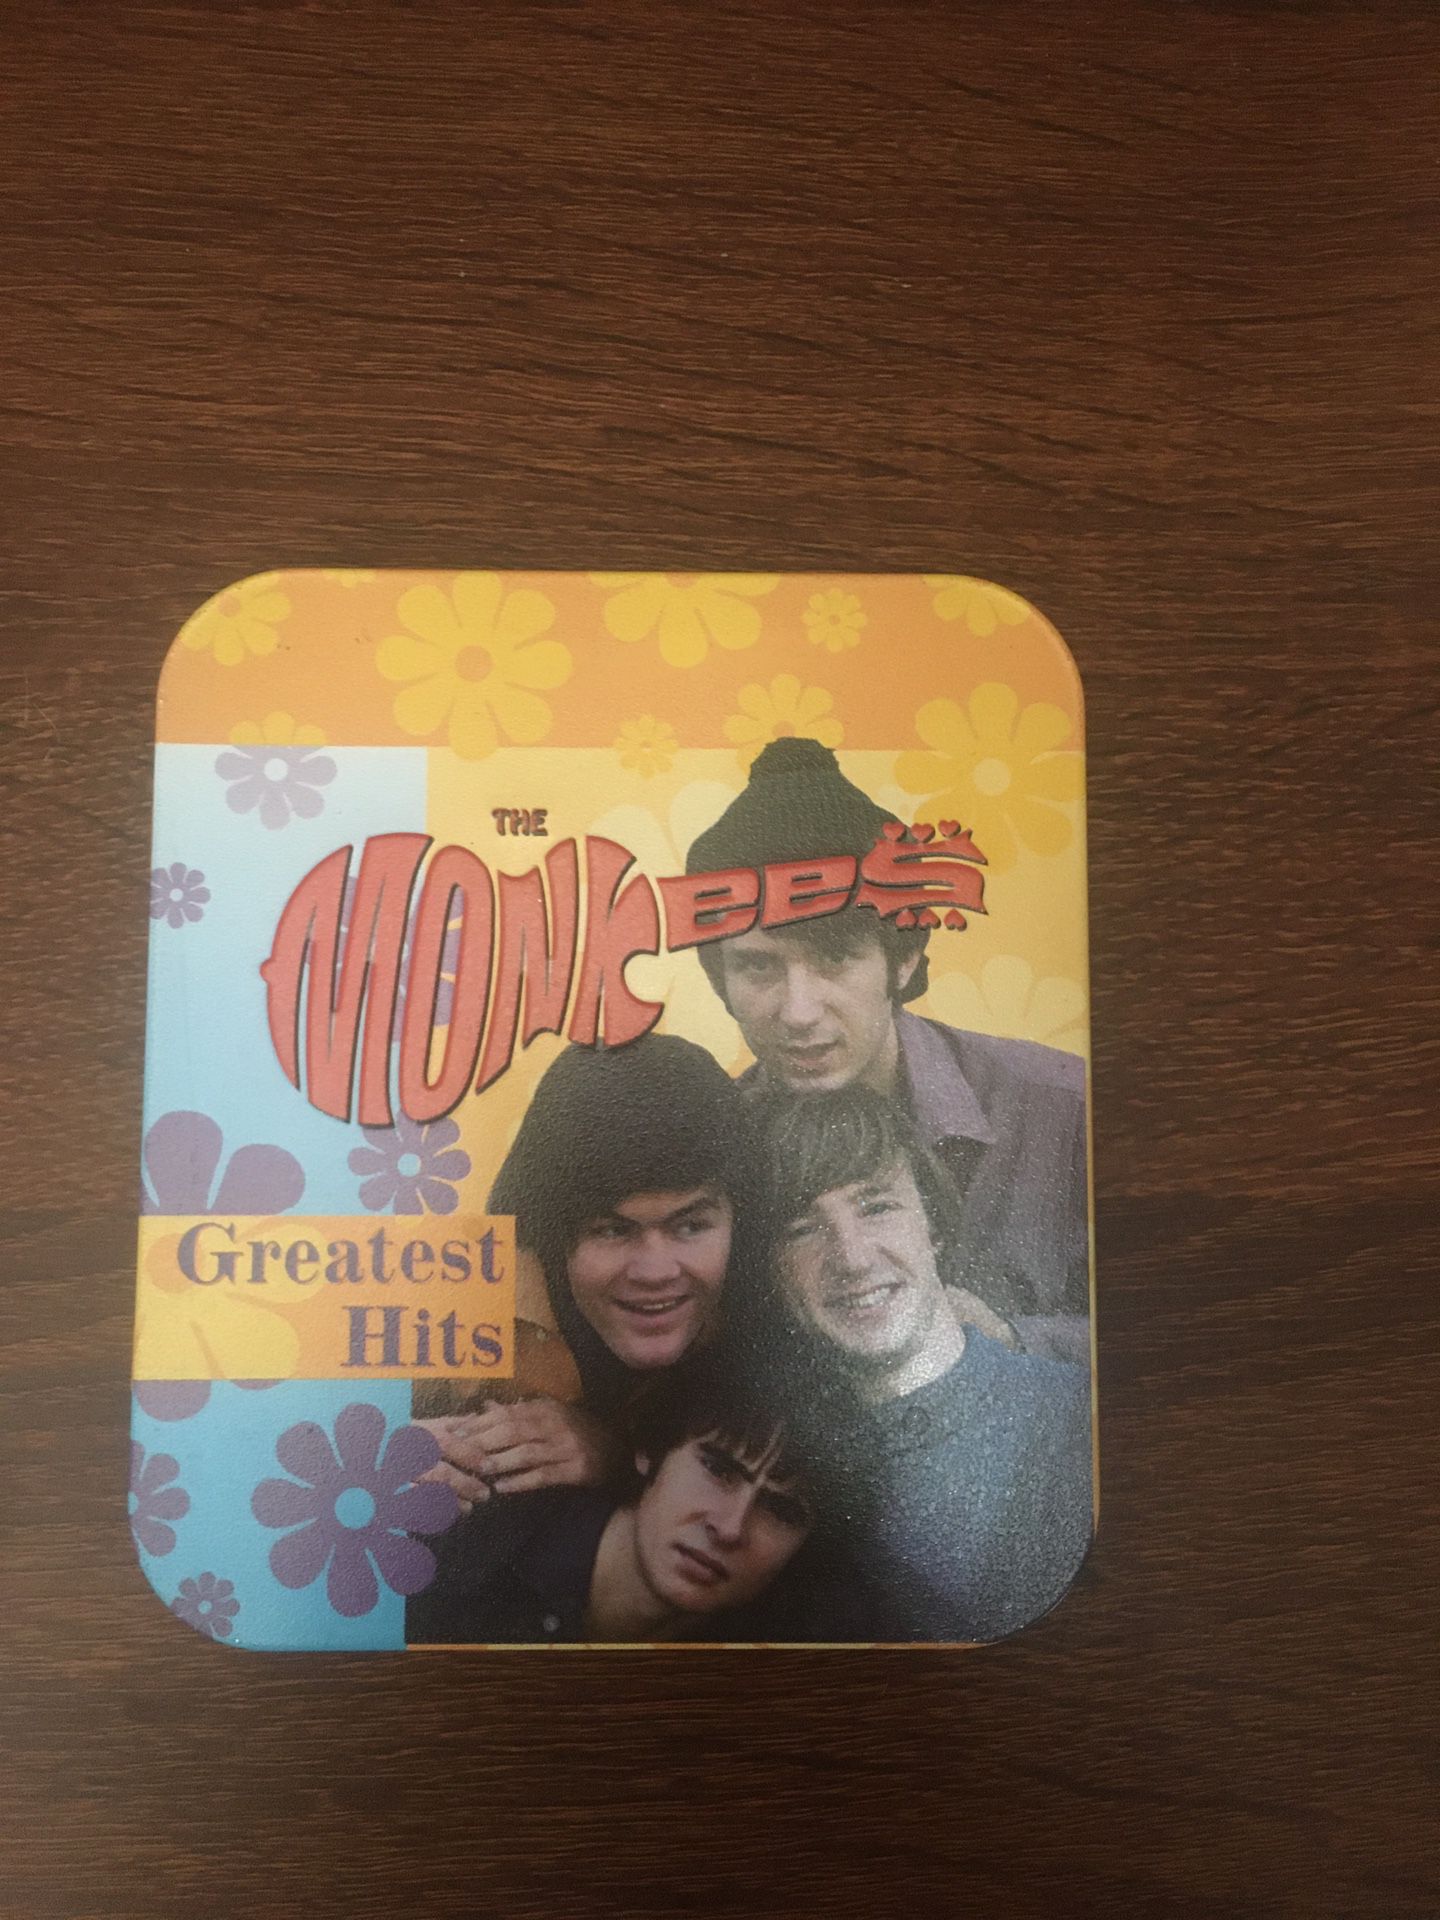 The Monkees: Greatest Hits CD